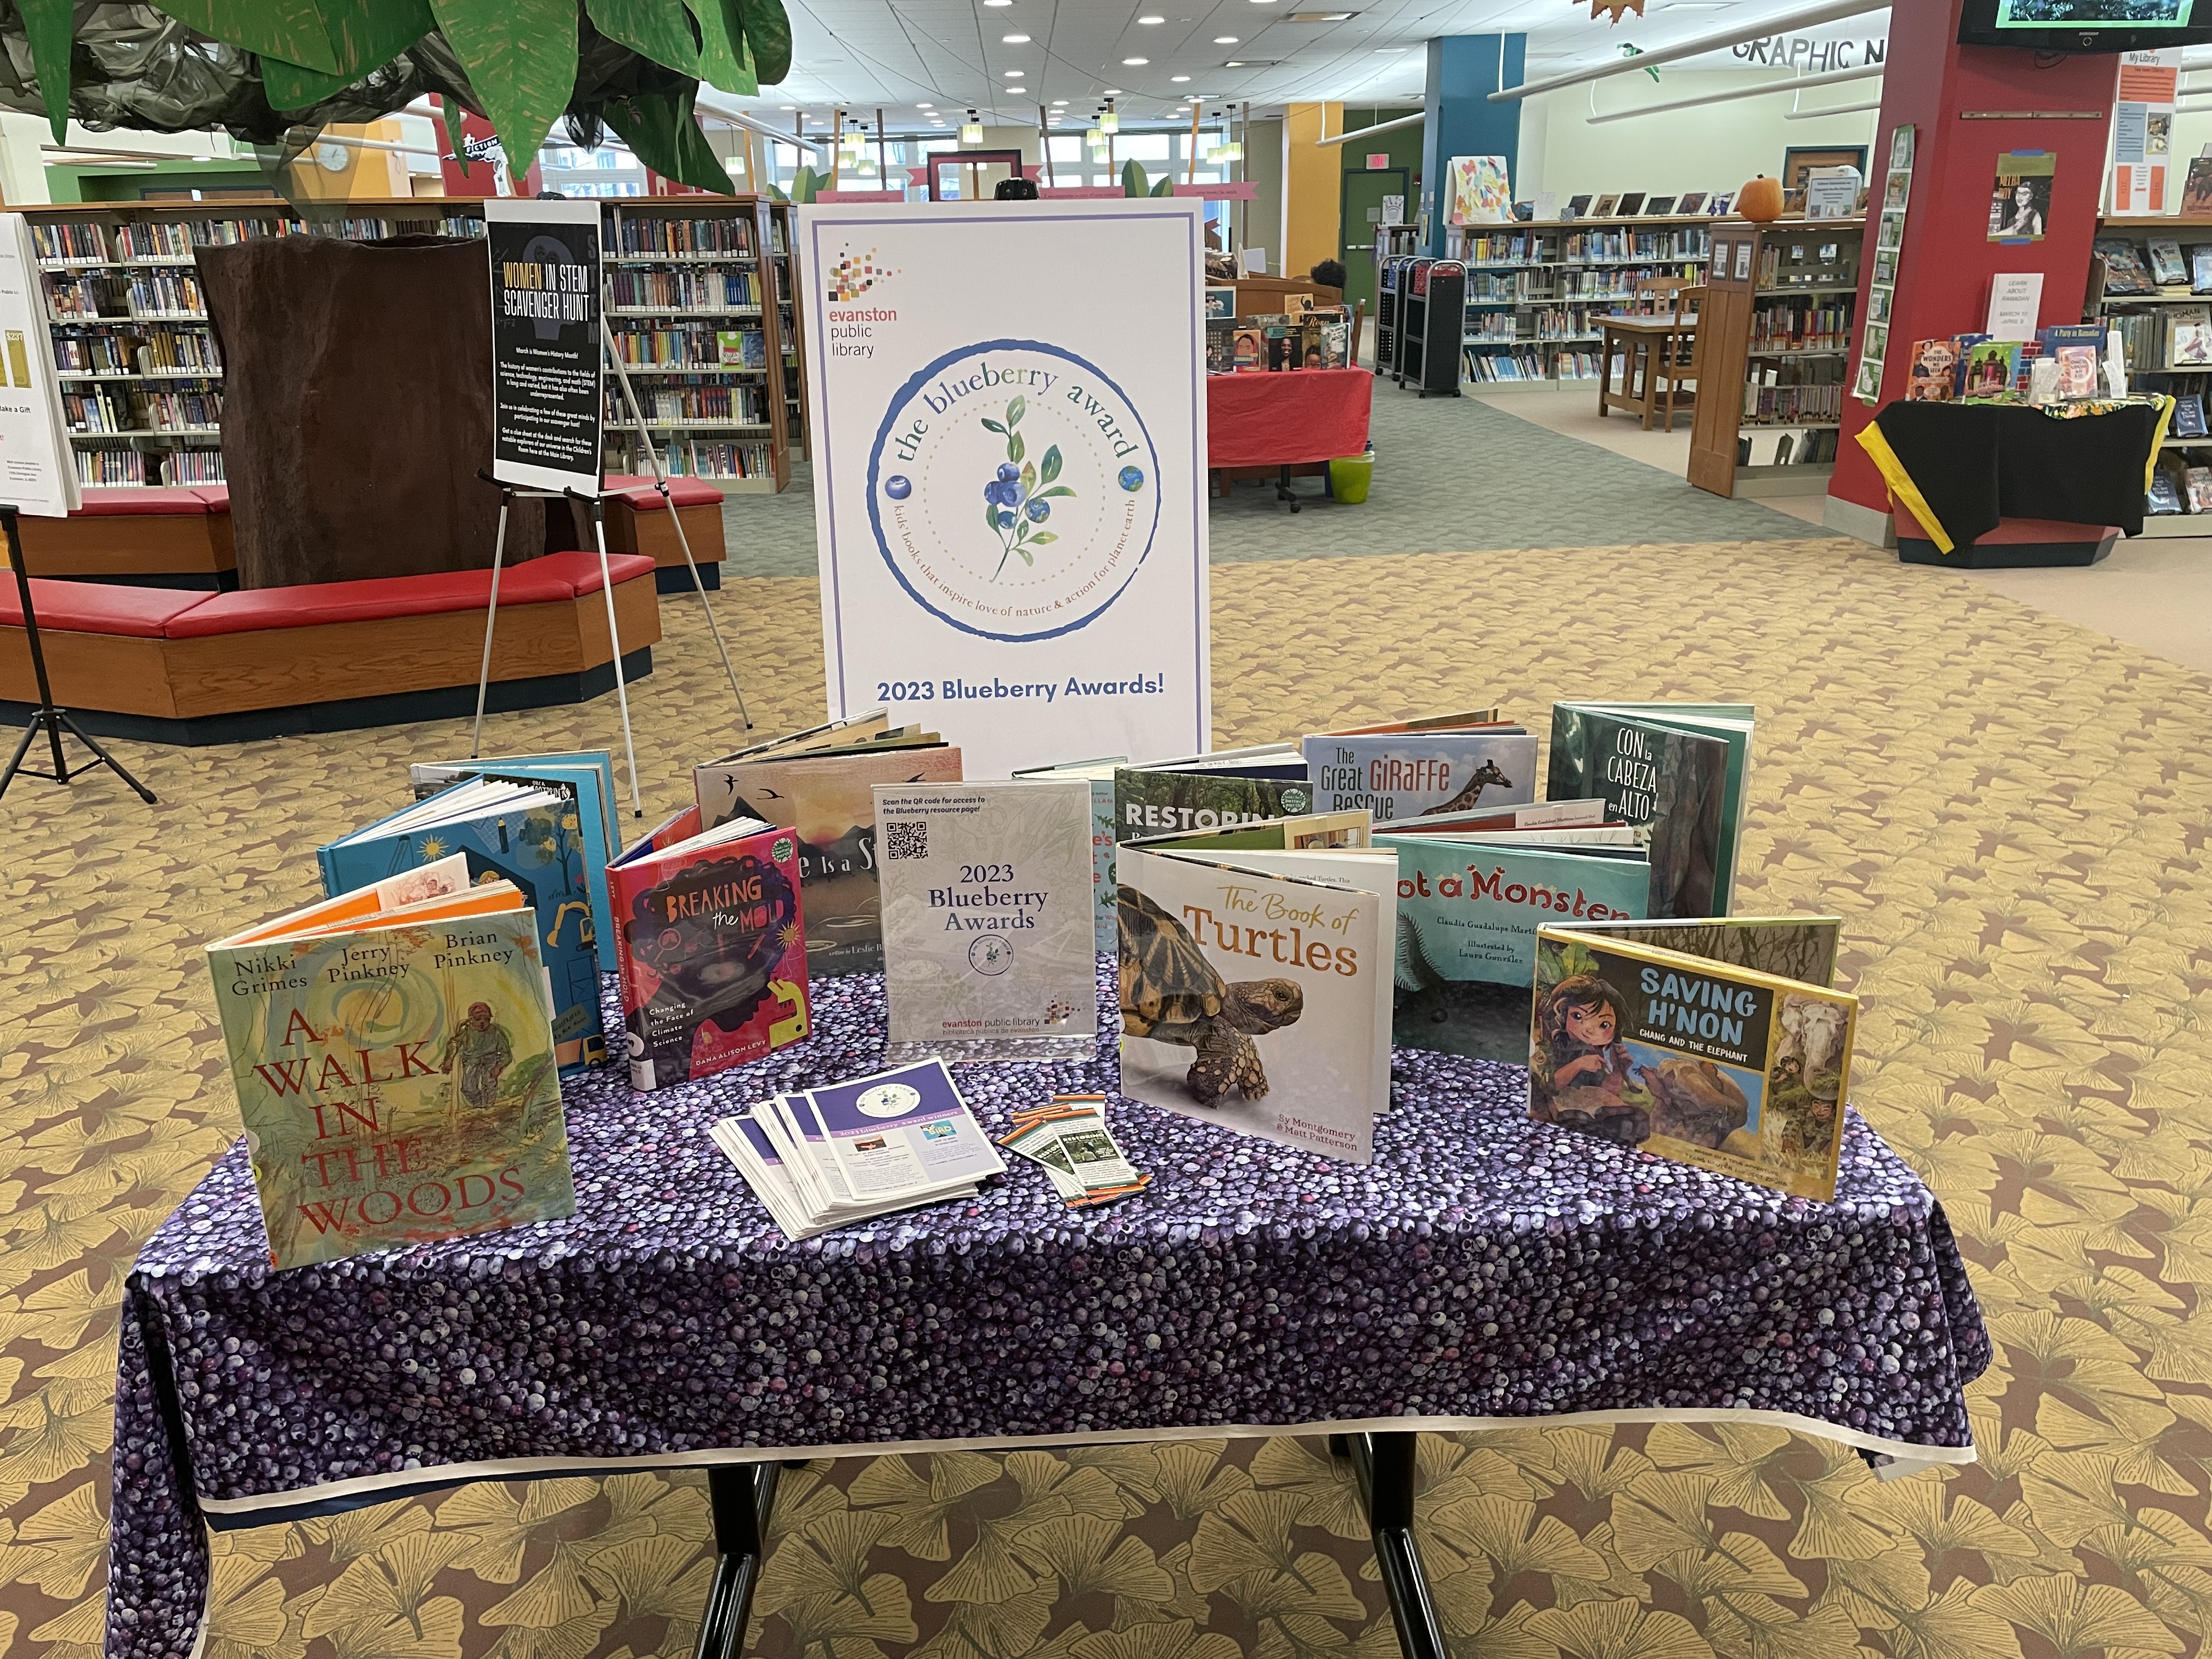 Book display of Blueberry Award Books